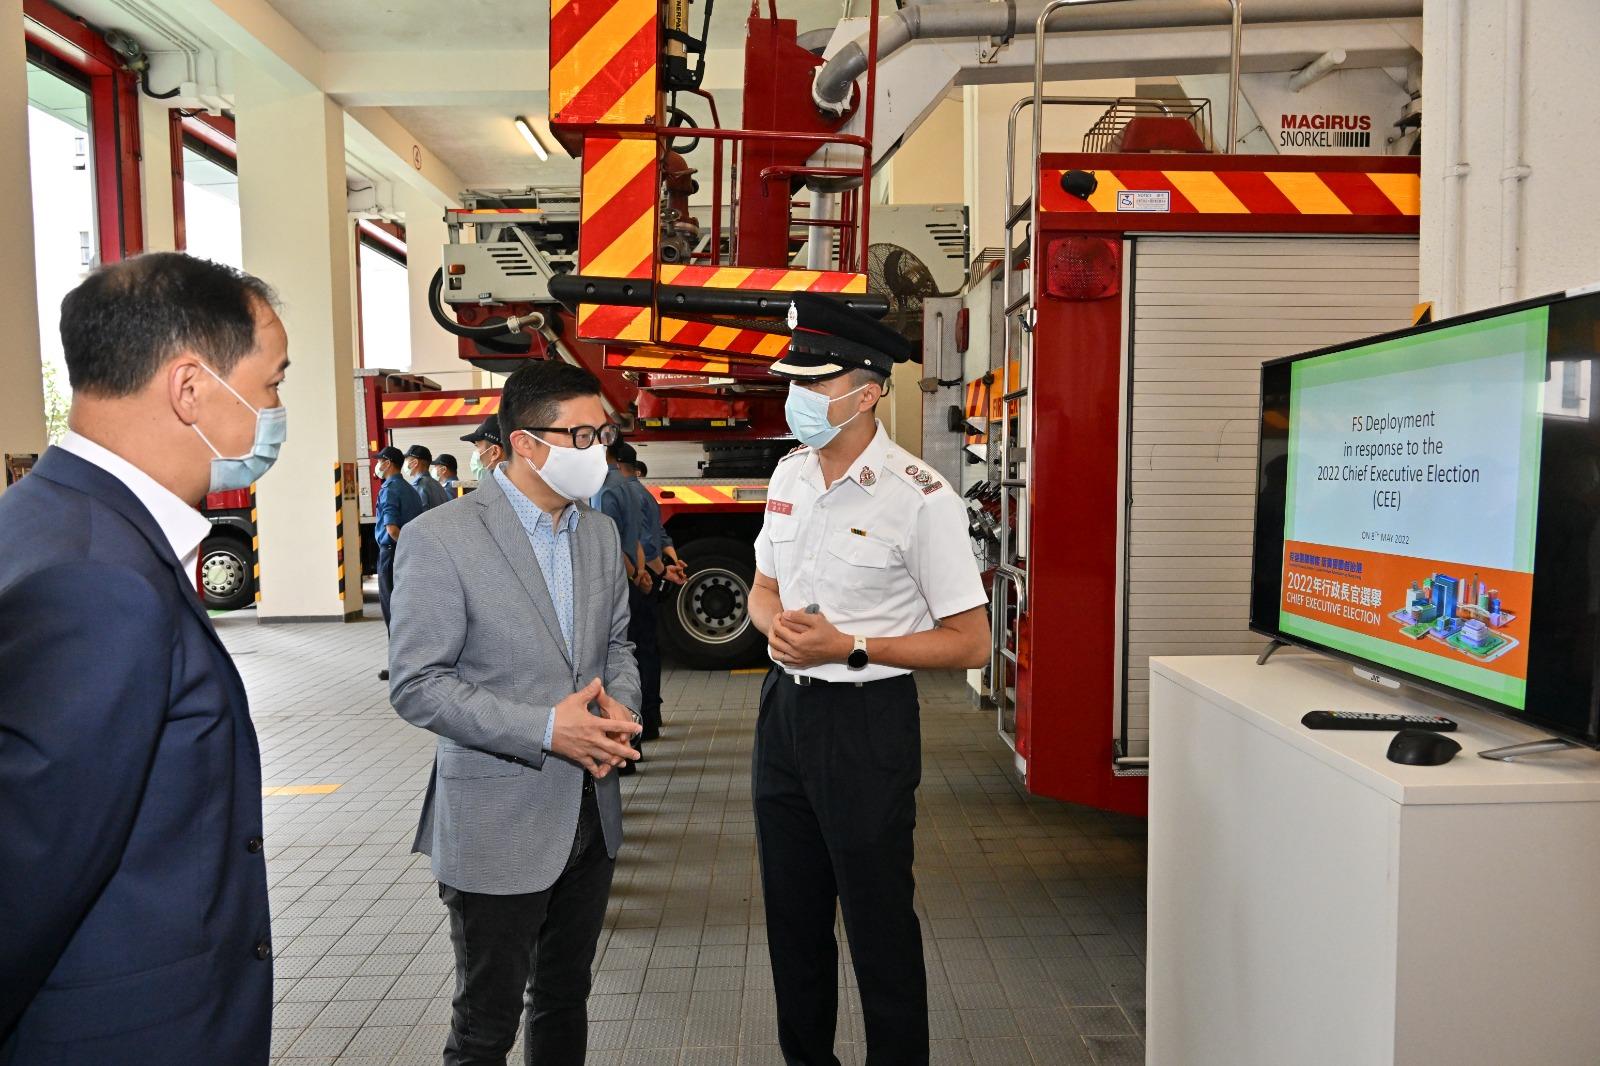 The Secretary for Security, Mr Tang Ping-keung, this morning (May 8) inspected the security arrangements in the vicinity of the Hong Kong Convention and Exhibition Centre (HKCEC) to ensure the 2022 Chief Executive Election be conducted in a safe and orderly manner. Photo shows Mr Tang (centre), accompanied by the Fire Services Department's Assistant Director (Hong Kong Island), Mr Cheng Sui-on (left), visiting Kong Wan Fire Station adjacent to the HKCEC where he was briefed by the personnel on the readiness of fire and ambulance personnel to ensure prompt arrival at the scene to provide emergency and rescue services for any emergencies.